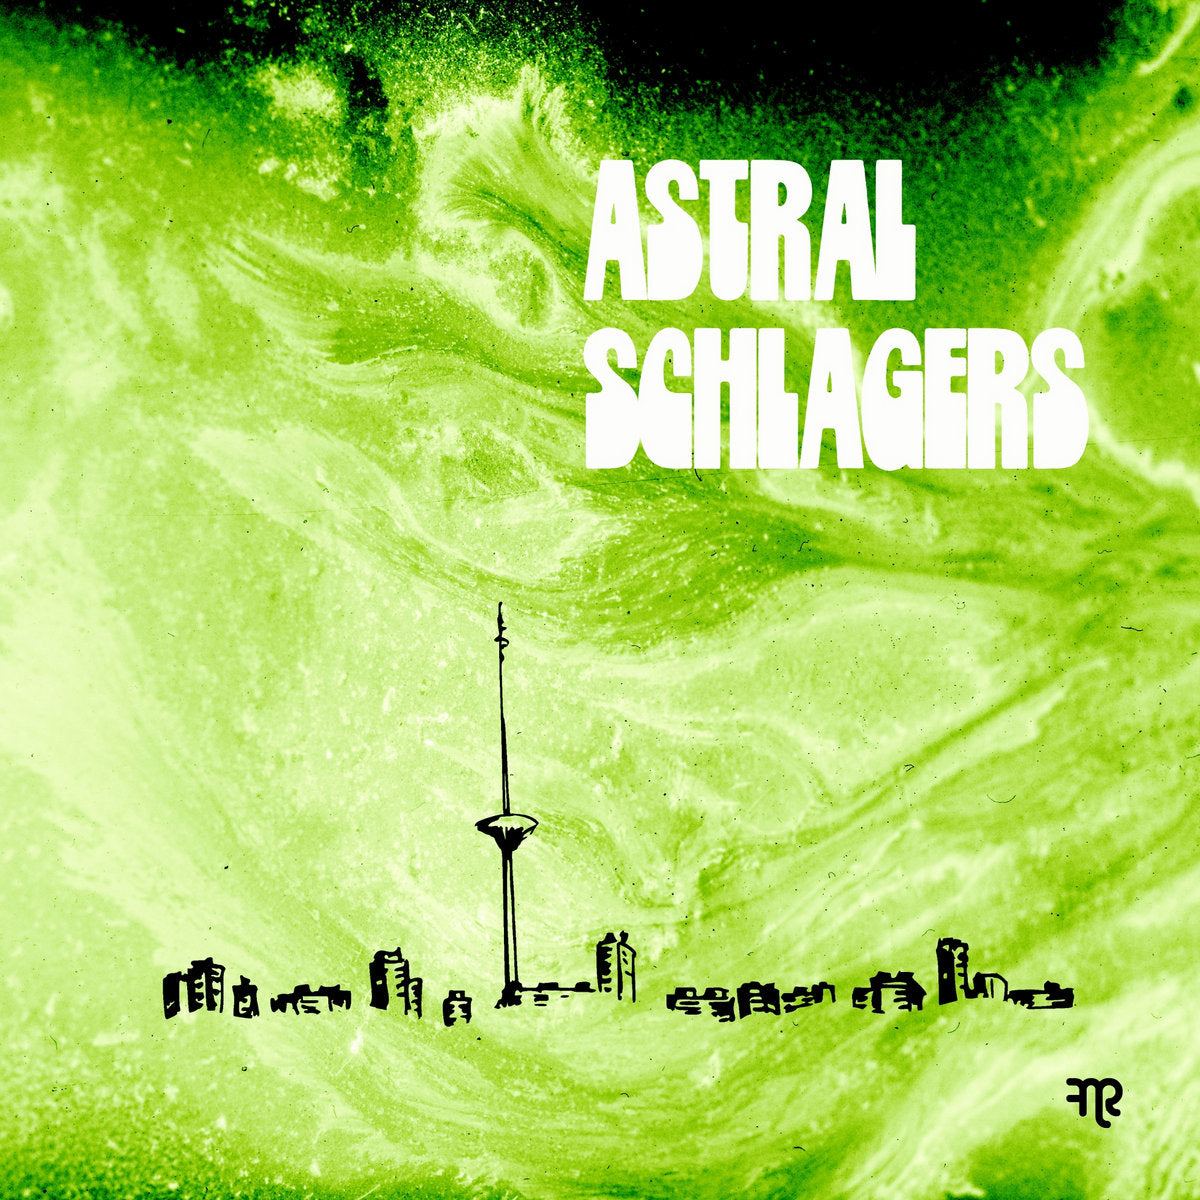 Misha Panfilov Sound Combo - Astral Schlagers